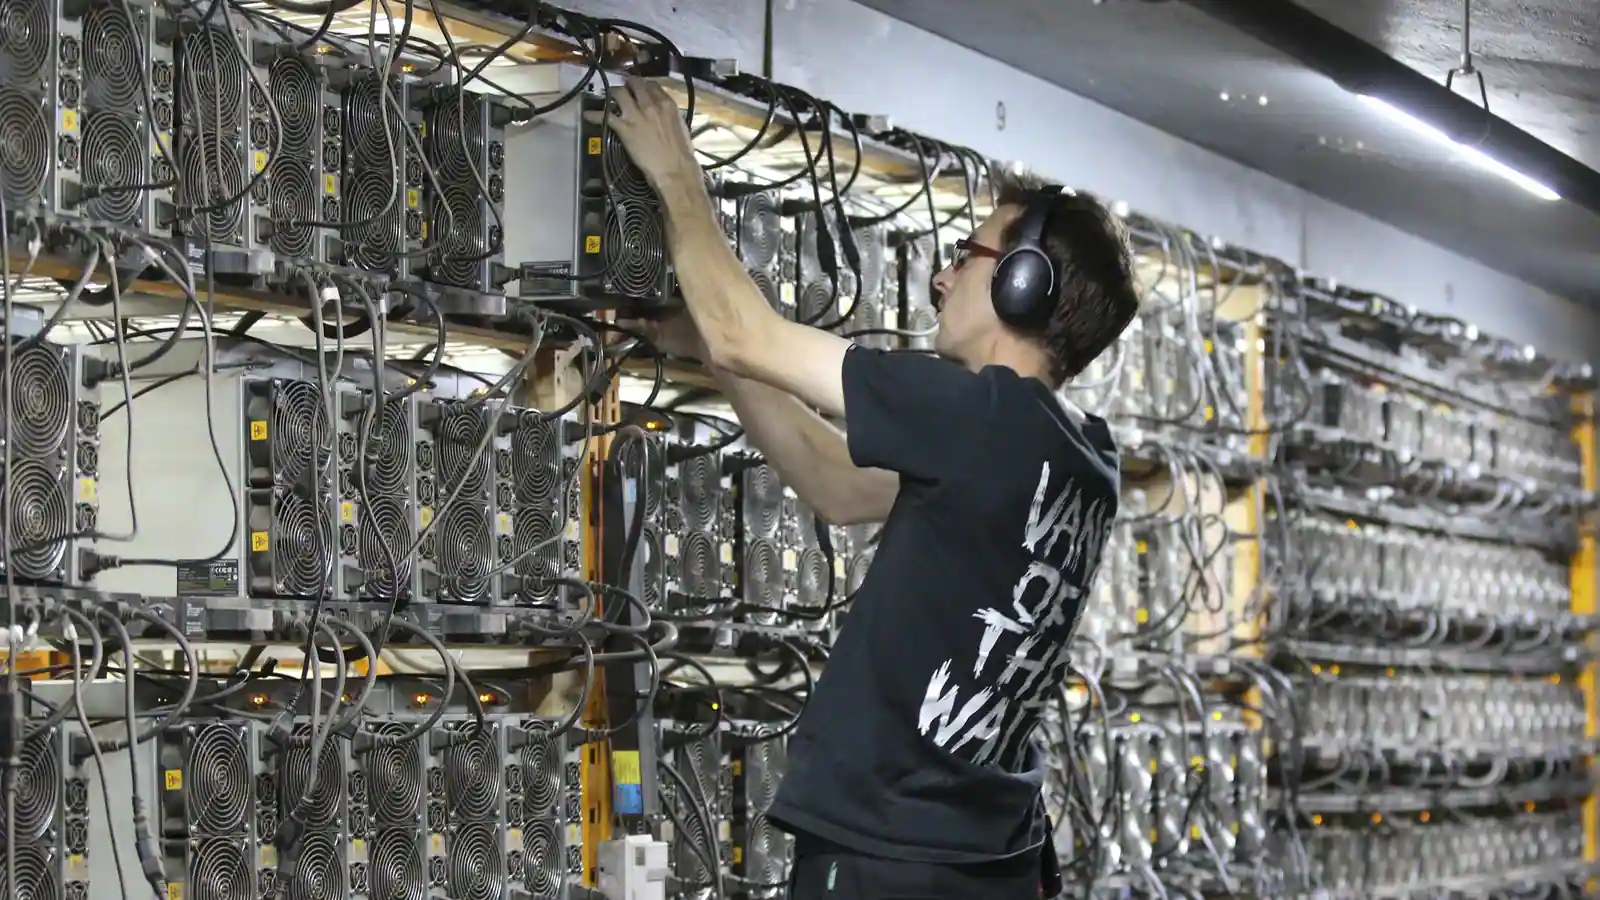 Hut 8 mining facility with thousands of cores processing computational power.